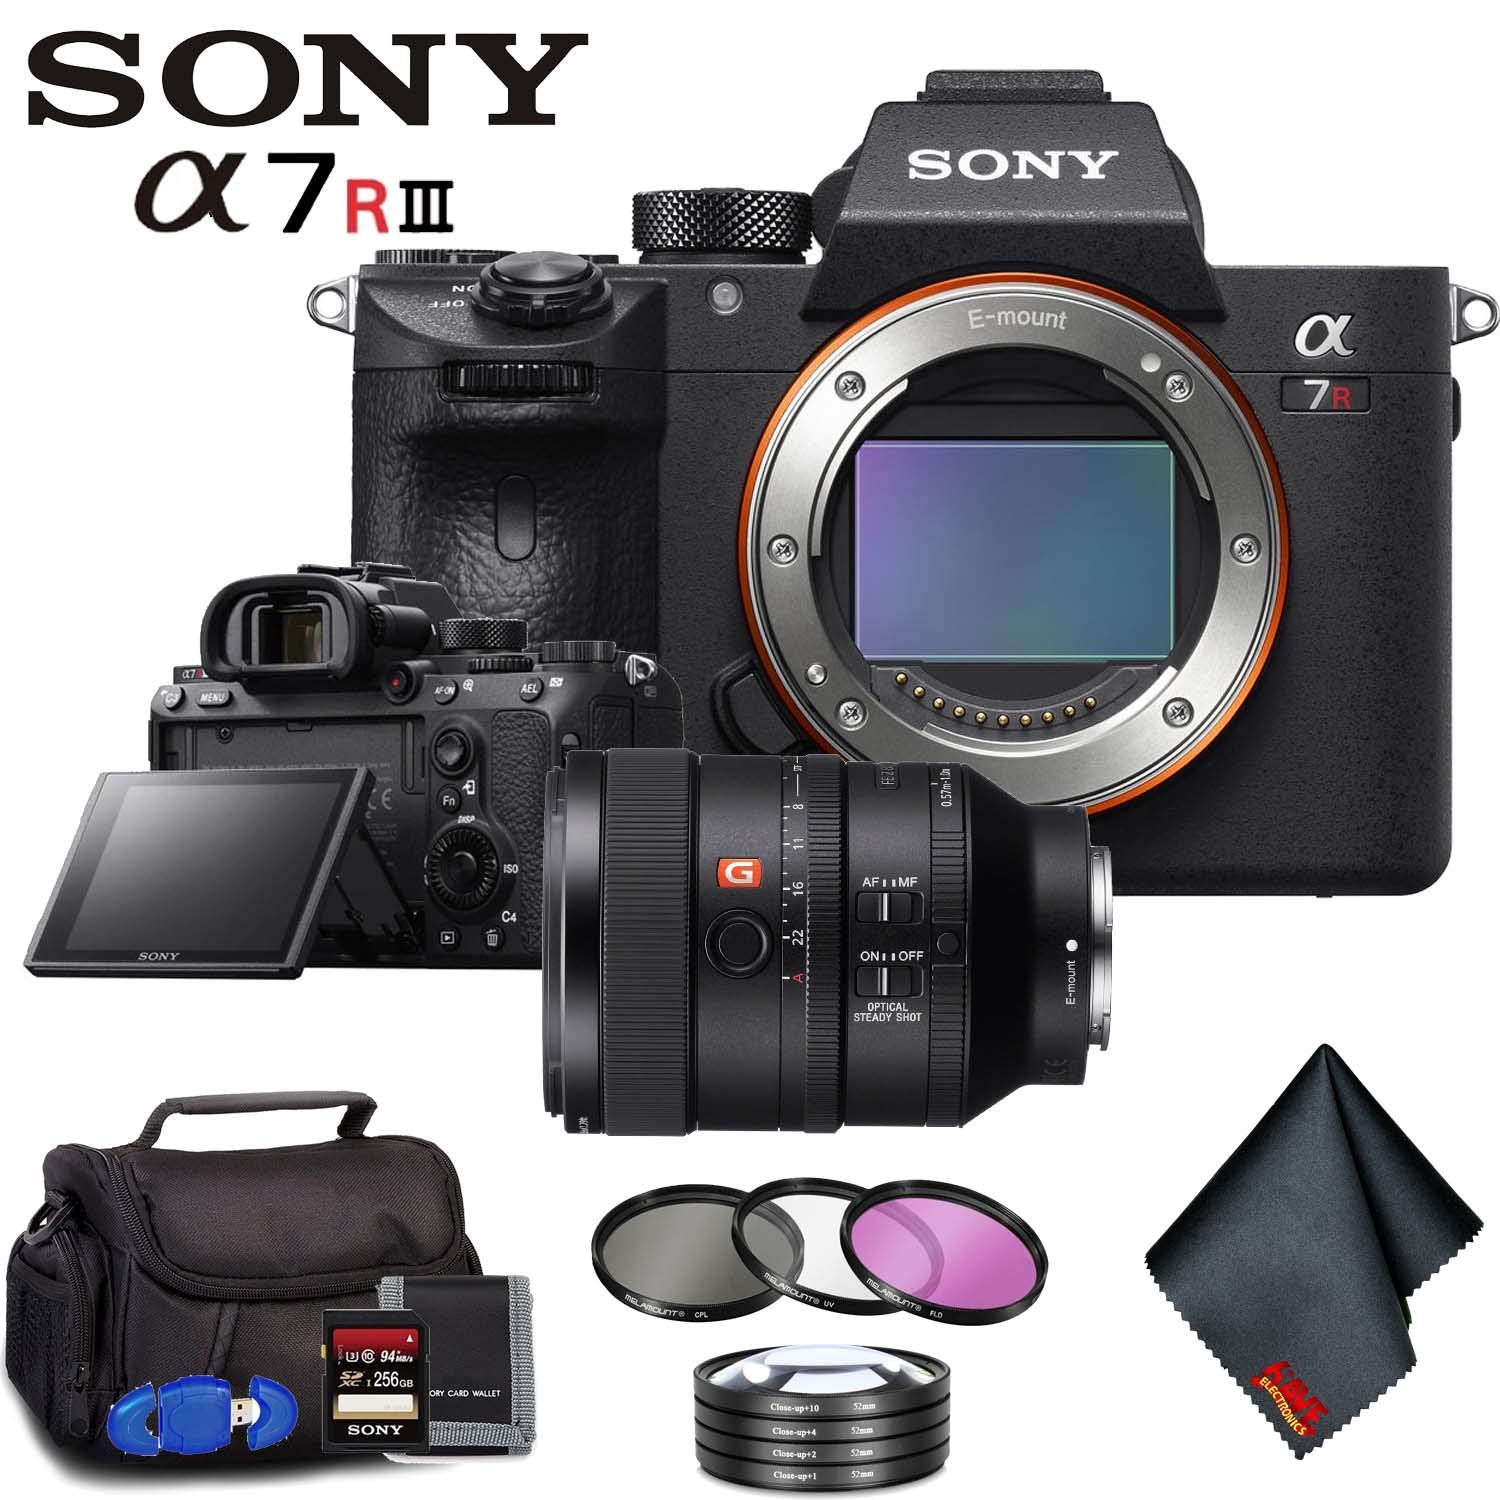 Sony Alpha a7R III Mirrorless Digital Camera (Body Only) + 100mm Lens + Filter Kit + Memory Card Kit + Carrying Case Advanced Bundle